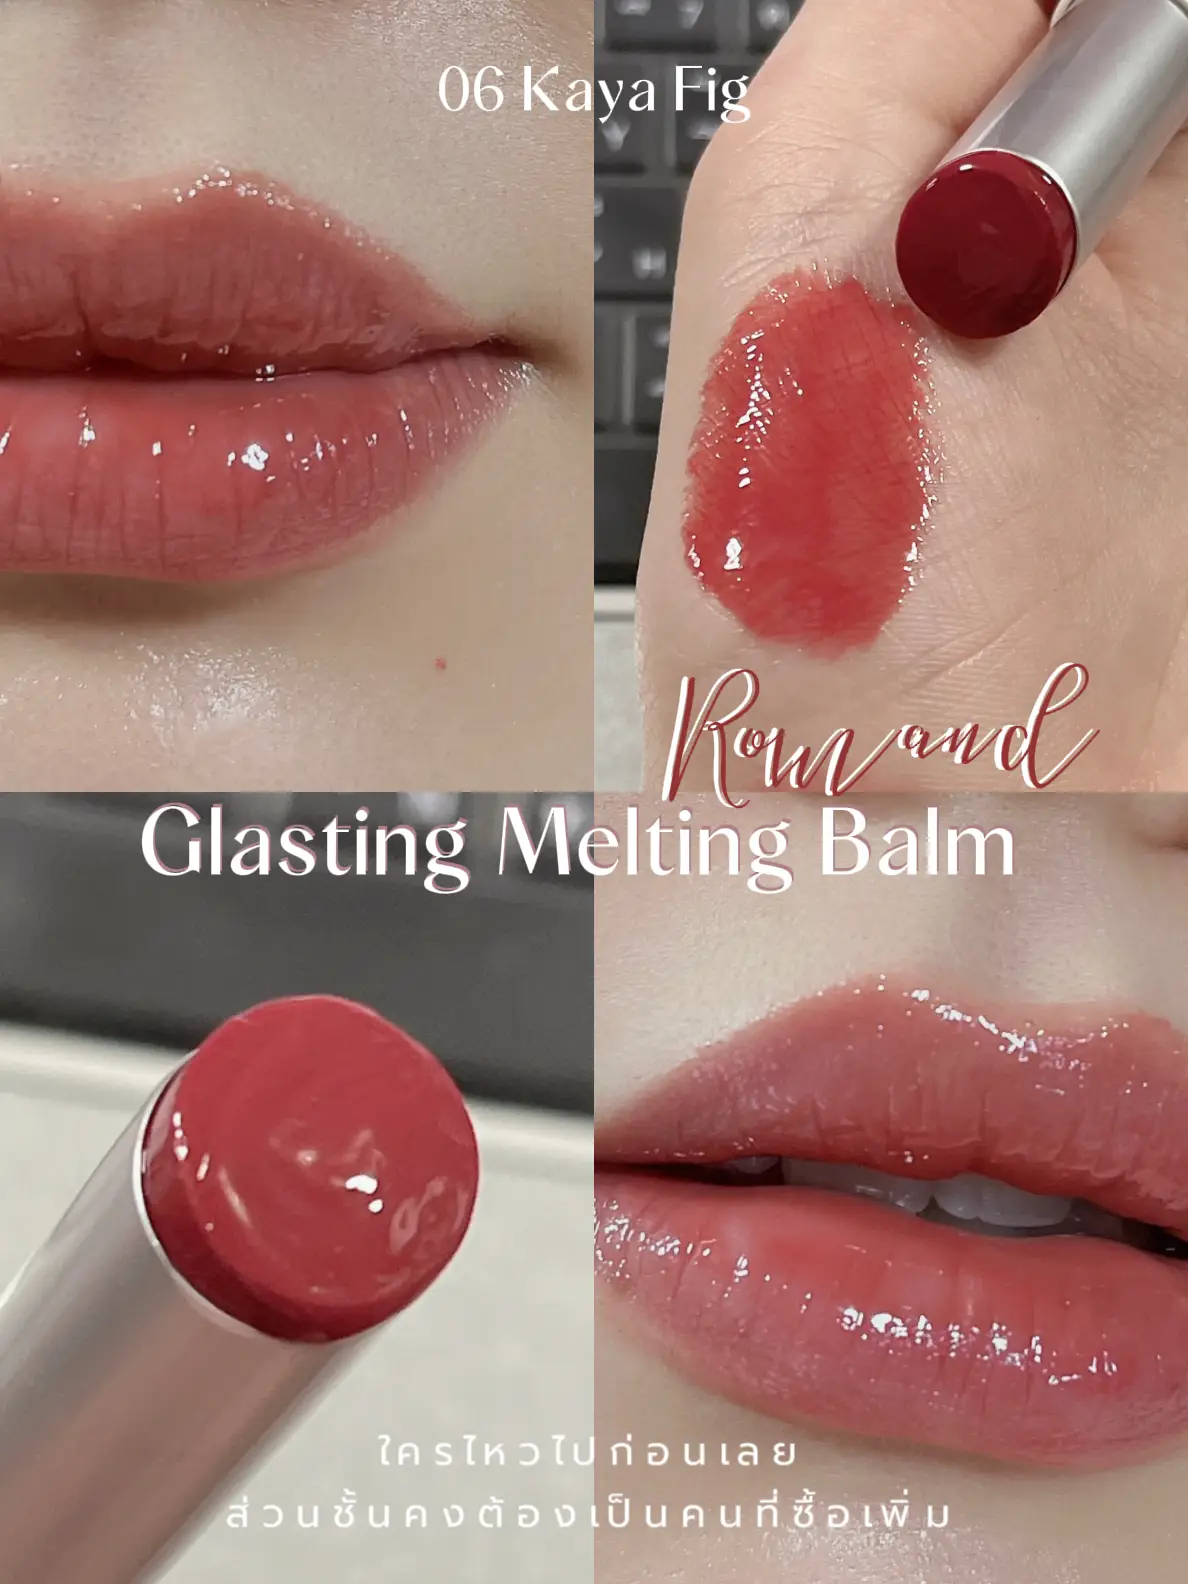 Rom&nd Glasting Melting Balm Dusty On The Nude Edition